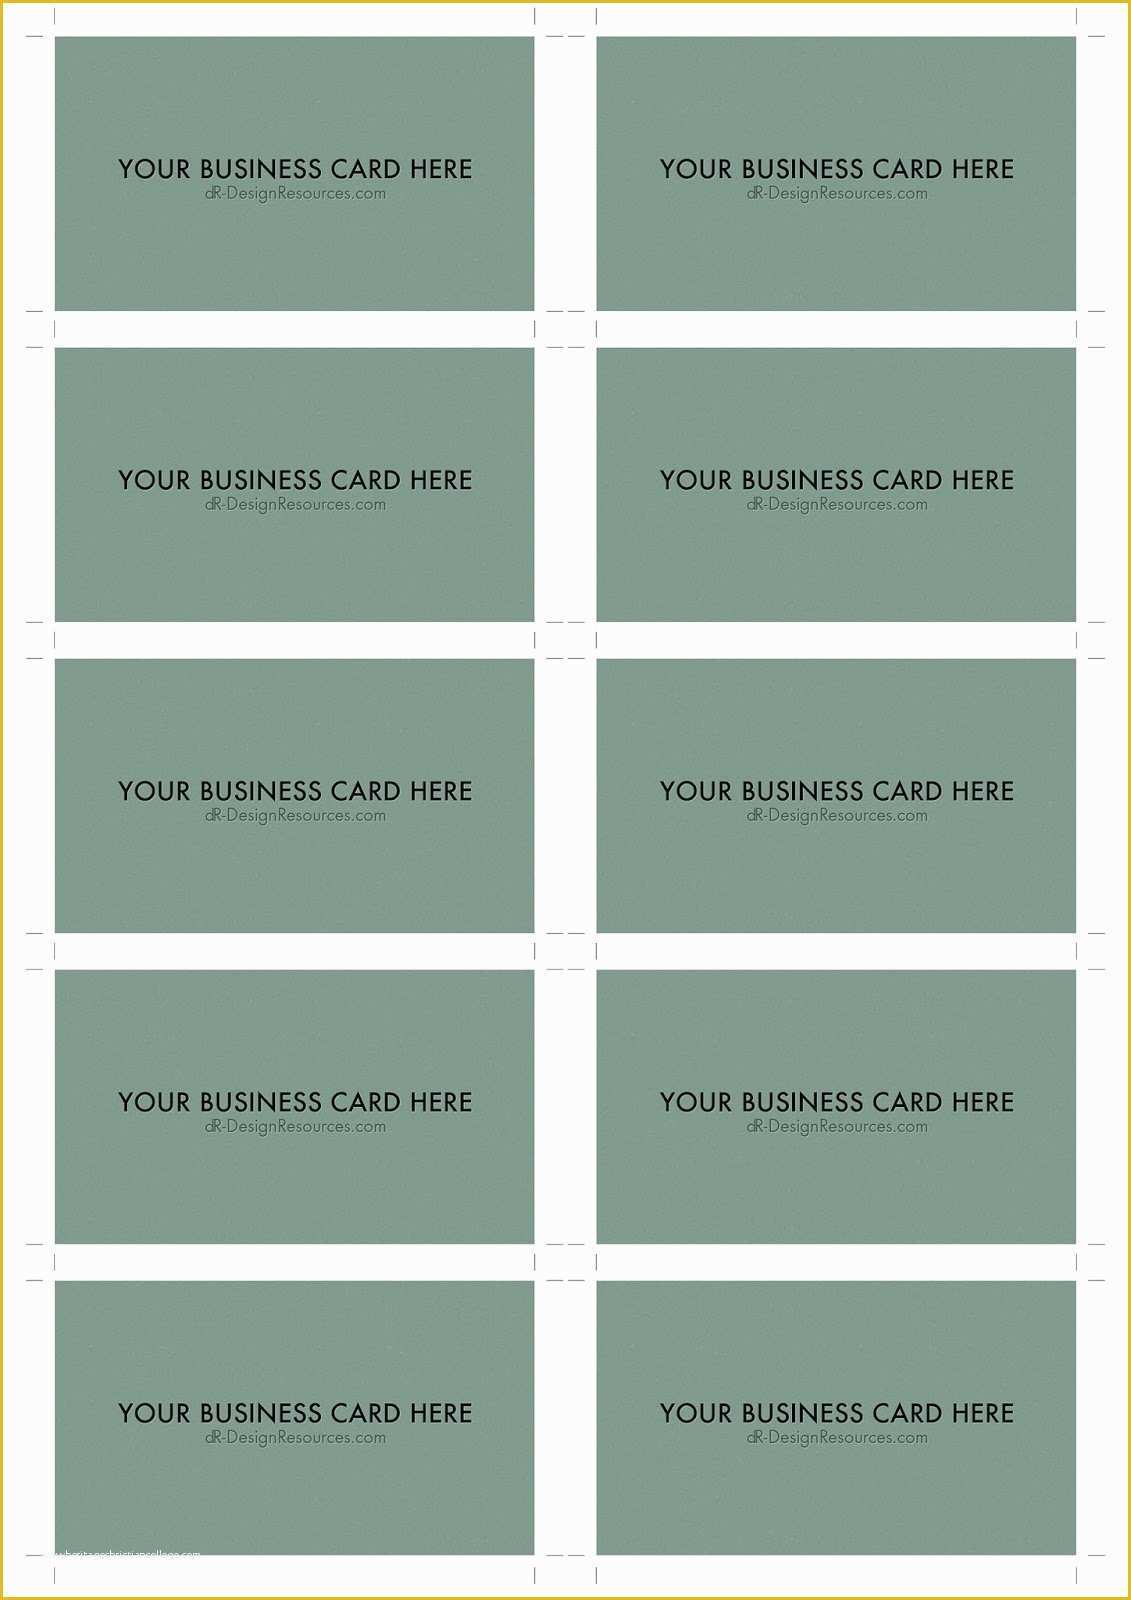 Free Online Business Card Templates Printable Of 10 Business Card Template Business Card Design